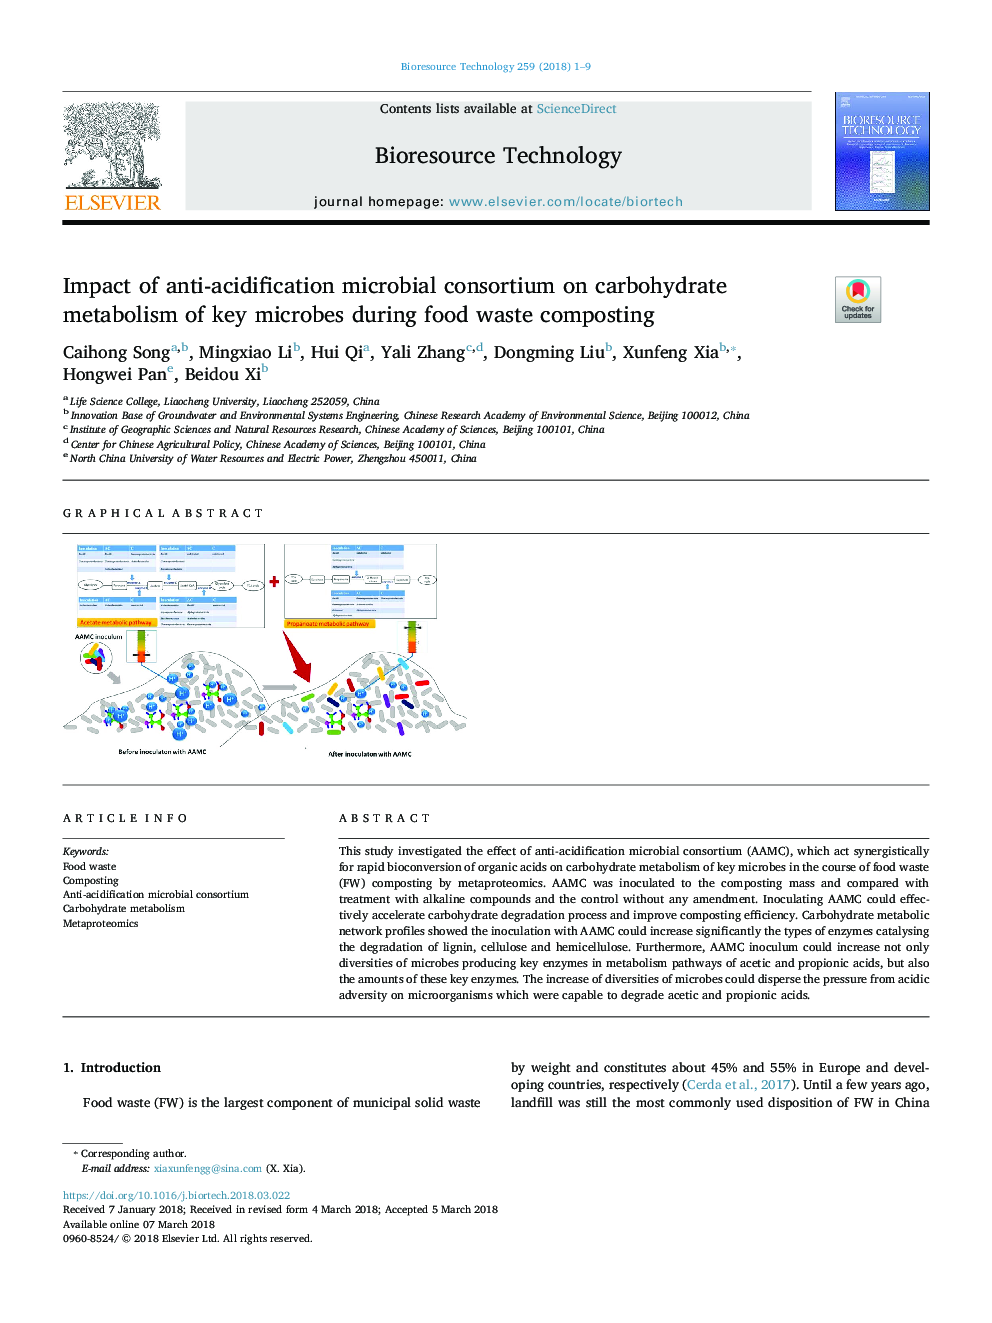 Impact of anti-acidification microbial consortium on carbohydrate metabolism of key microbes during food waste composting